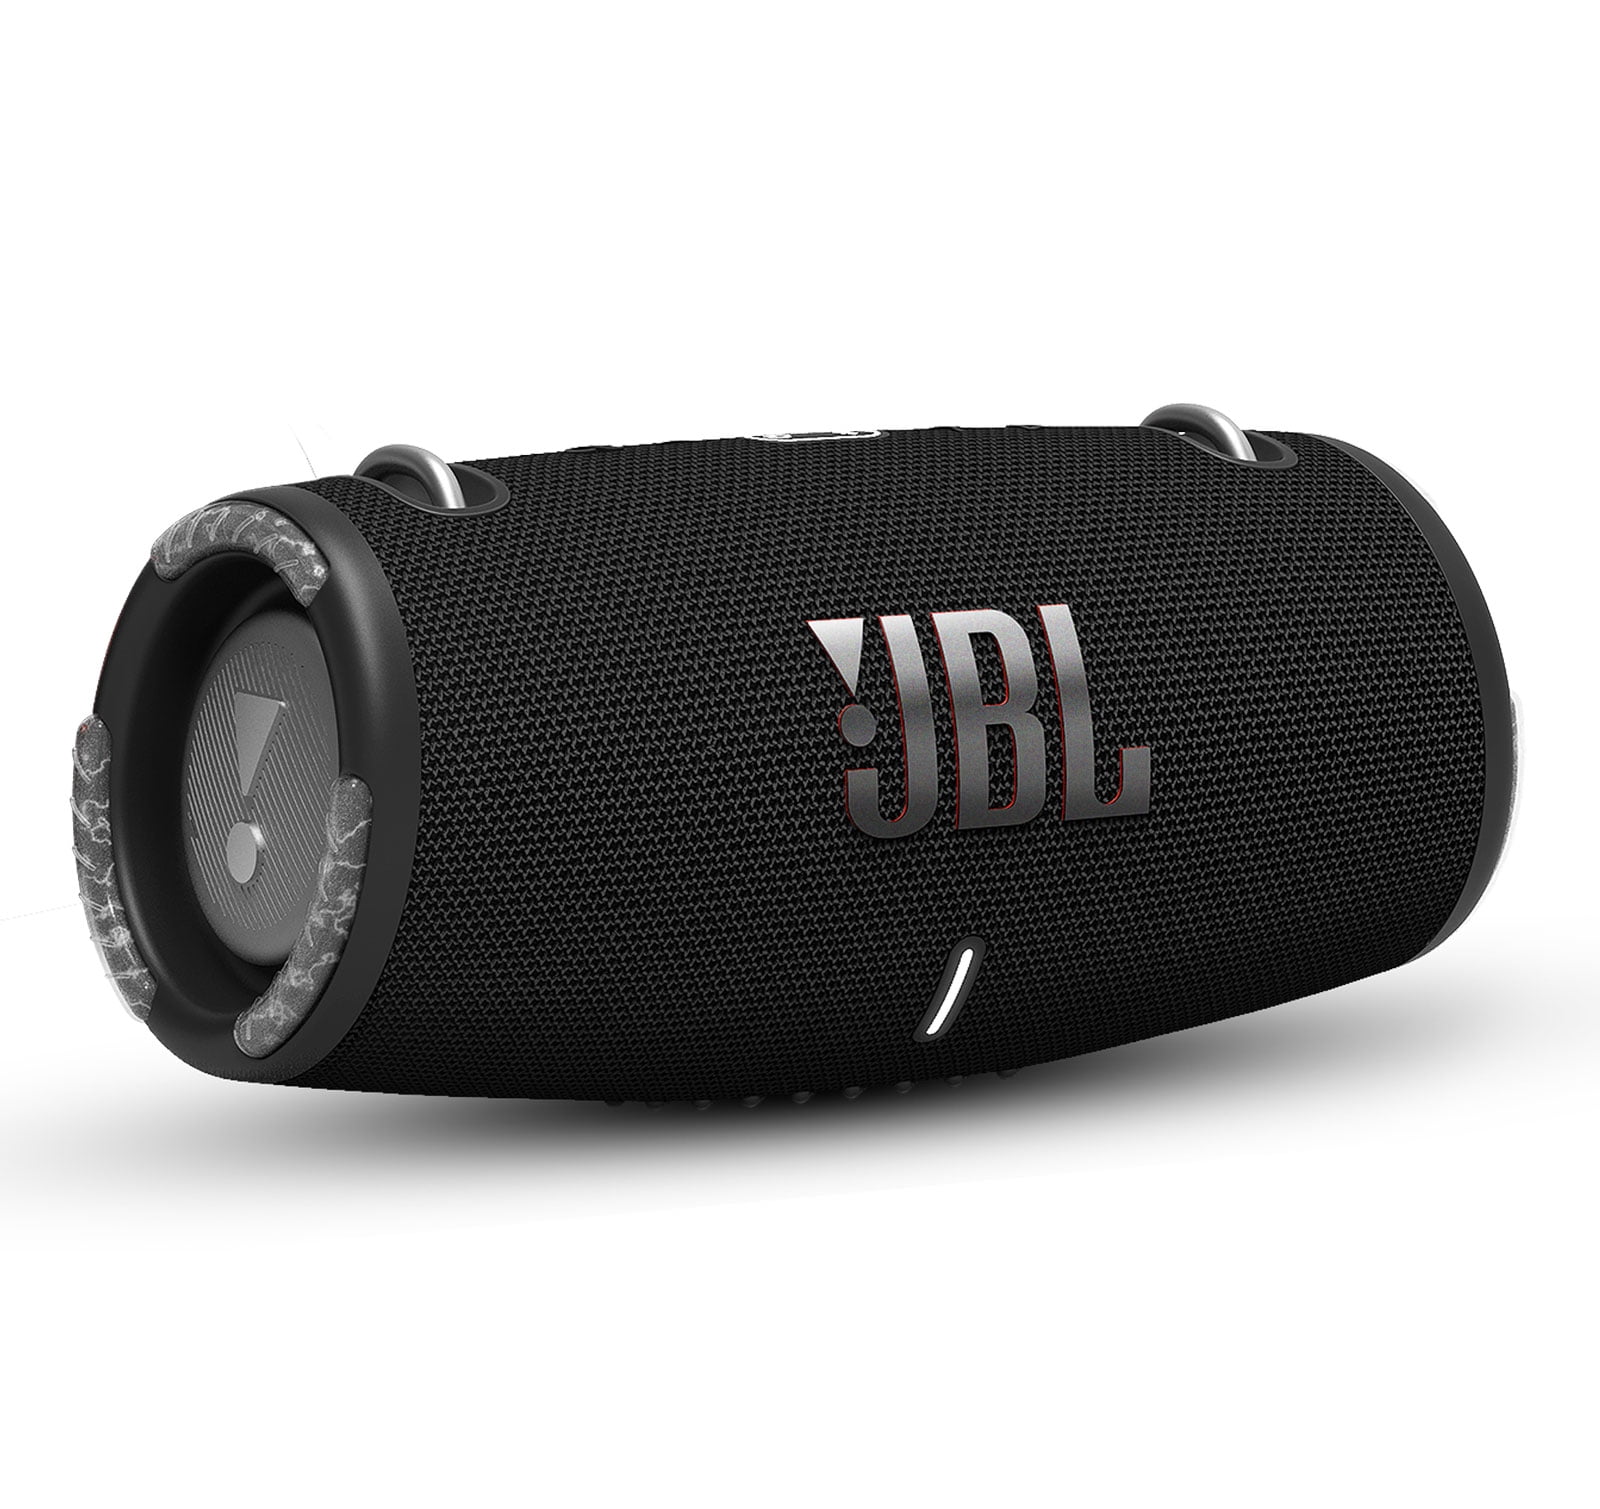 This Top-Rated JBL Bluetooth Speaker Just Got a Massive Price Cut